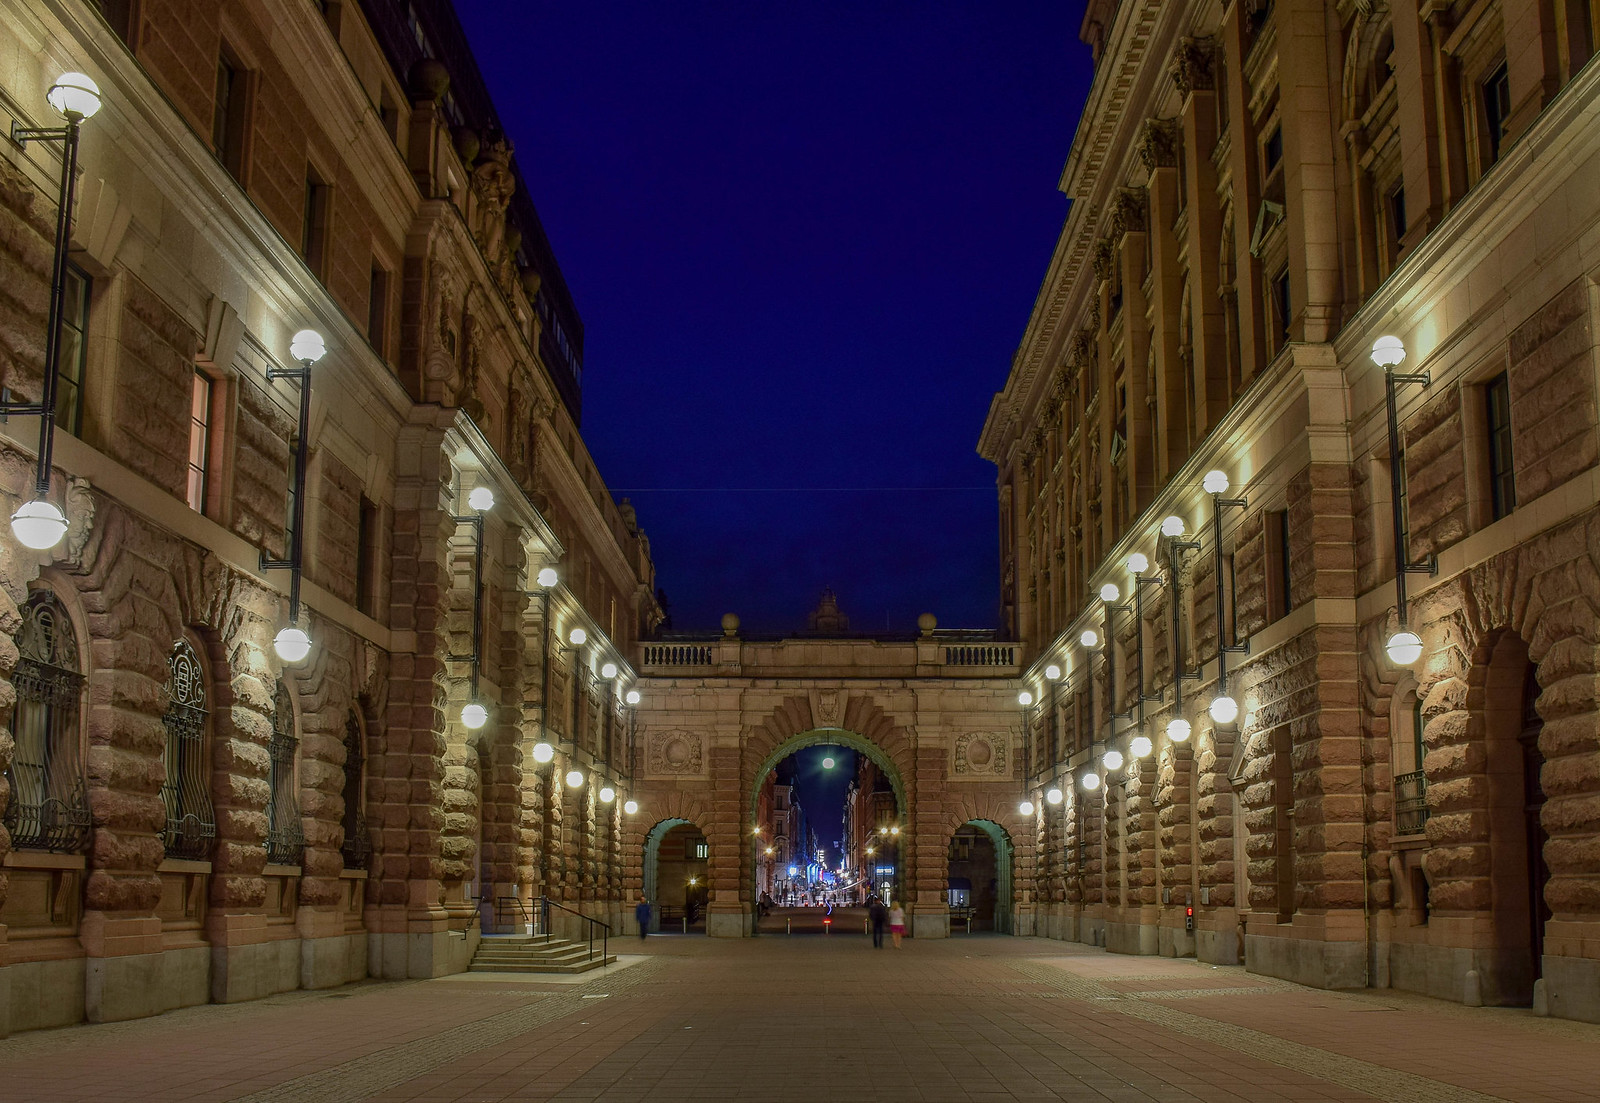 Visit the Swedish Parliament in Old Town Stockholm